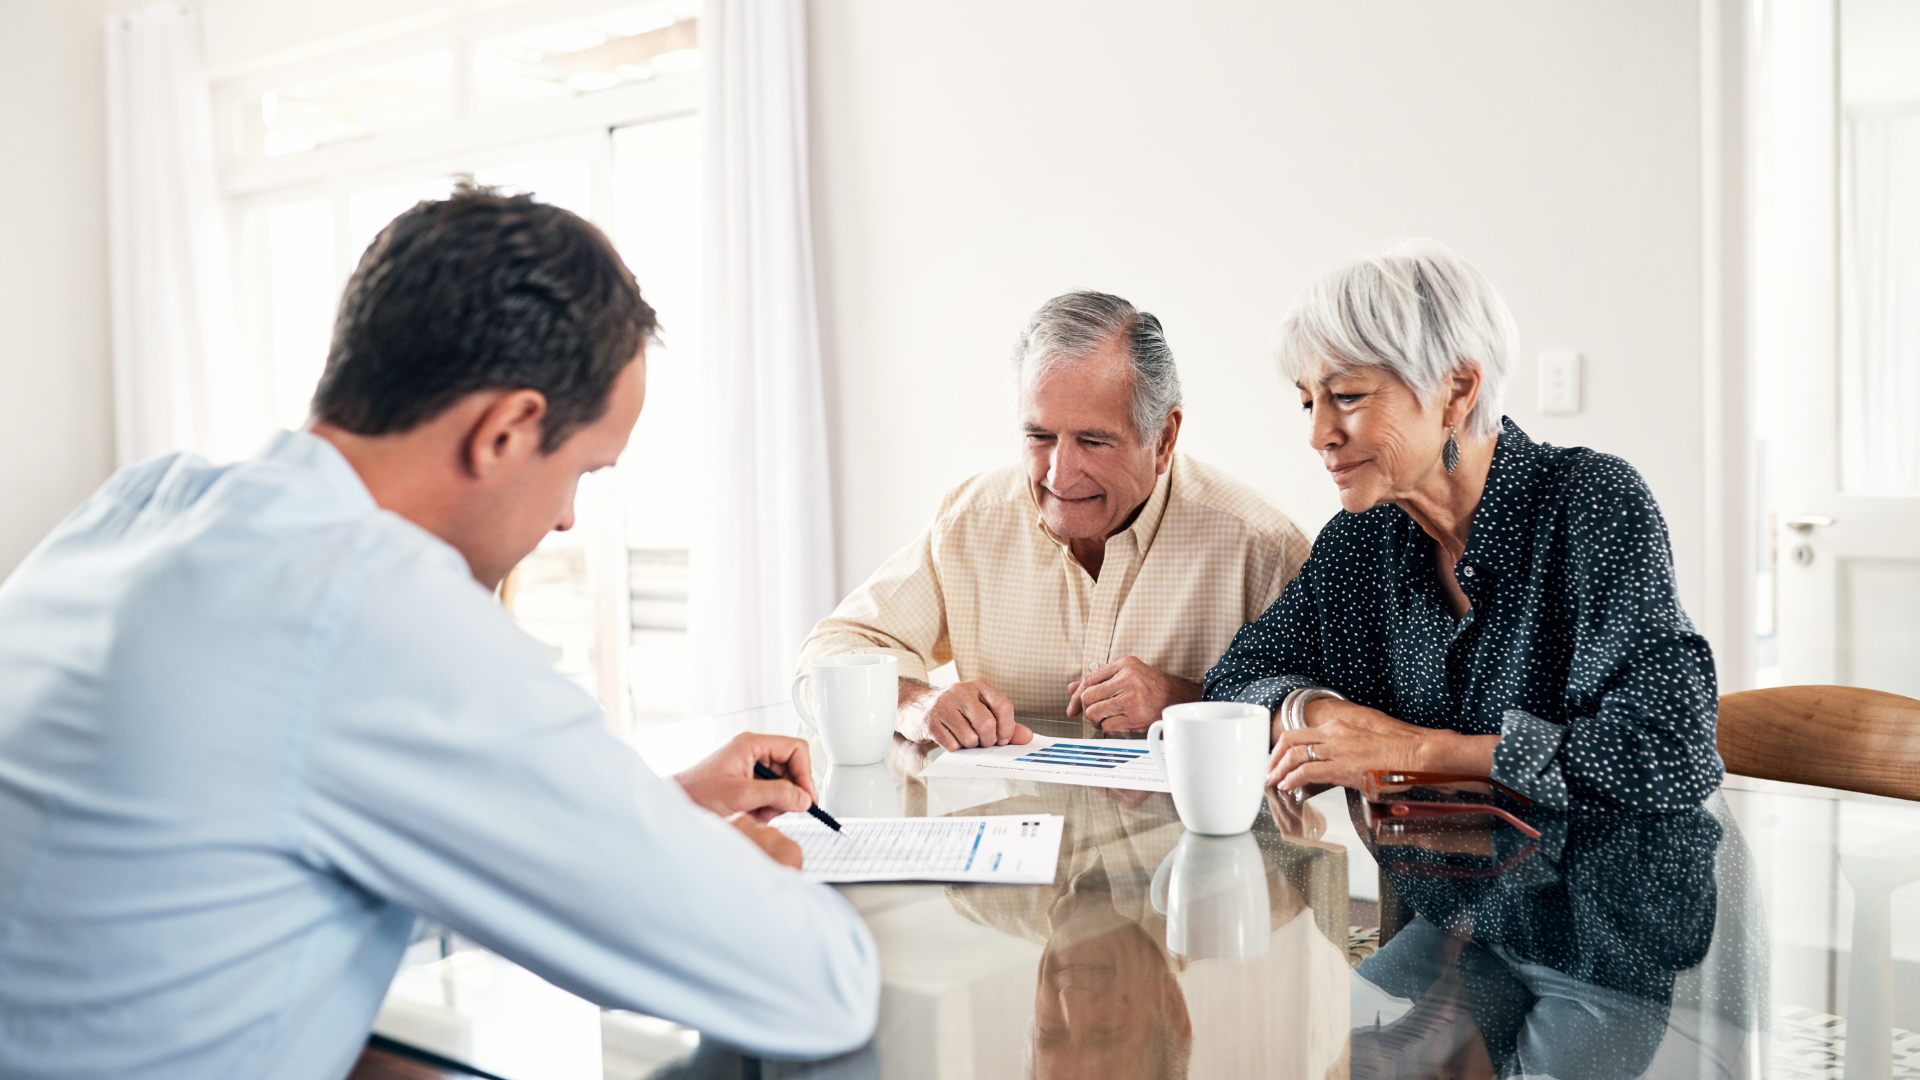 An image of two elderly business owners in Burlington speaking with their business adviser about ESOPs.